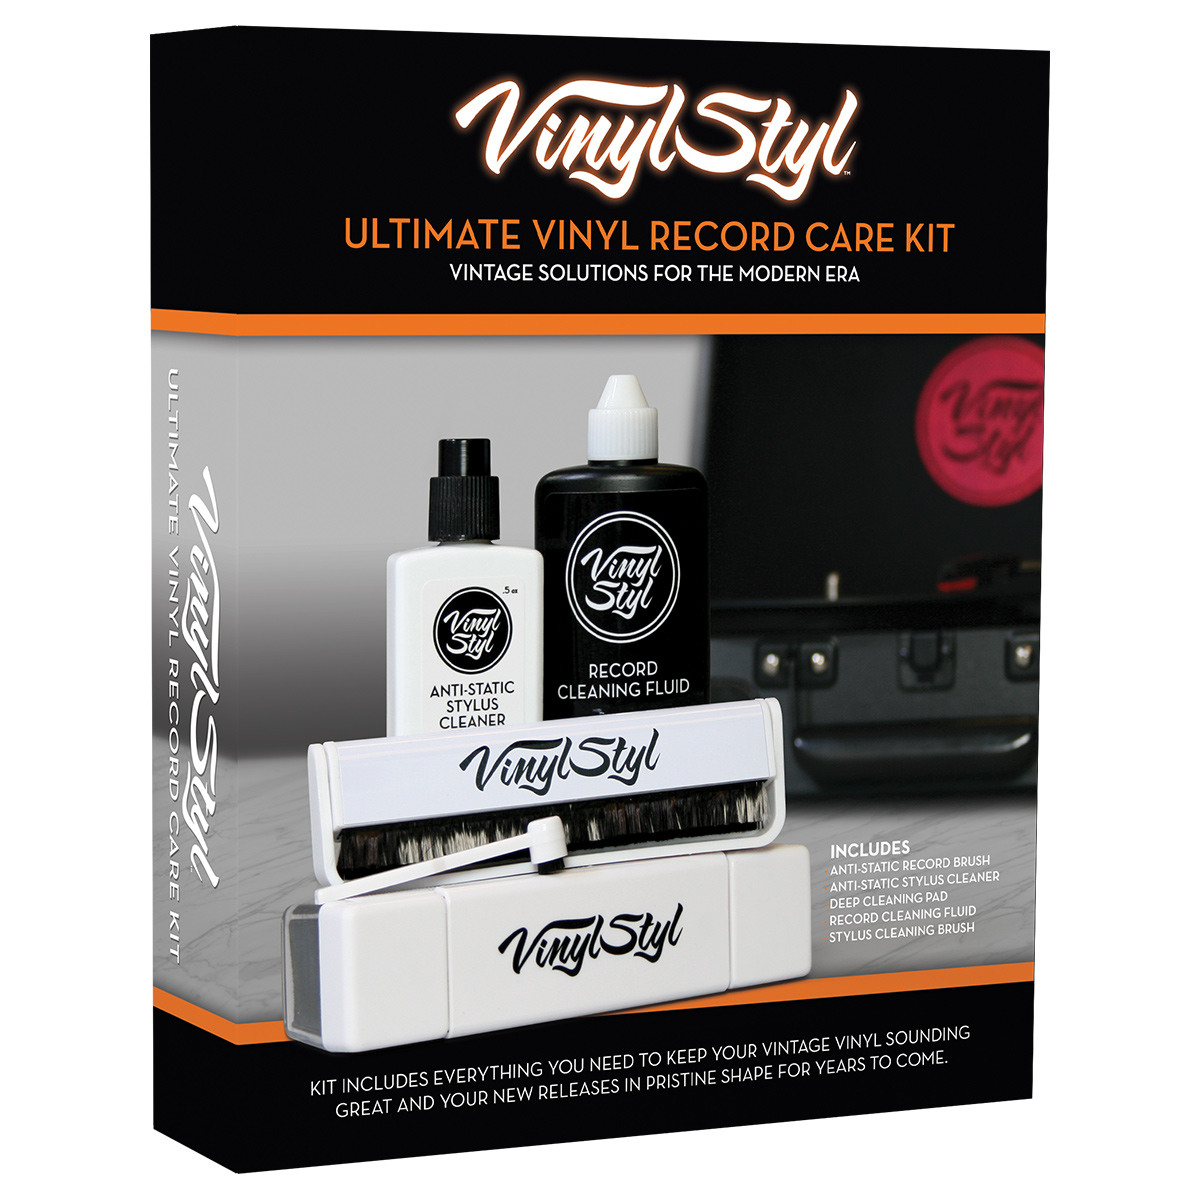 Check out the VINYL STYL™ ULTIMATE VINYL RECORD CARE KIT! – Vinyl Styl